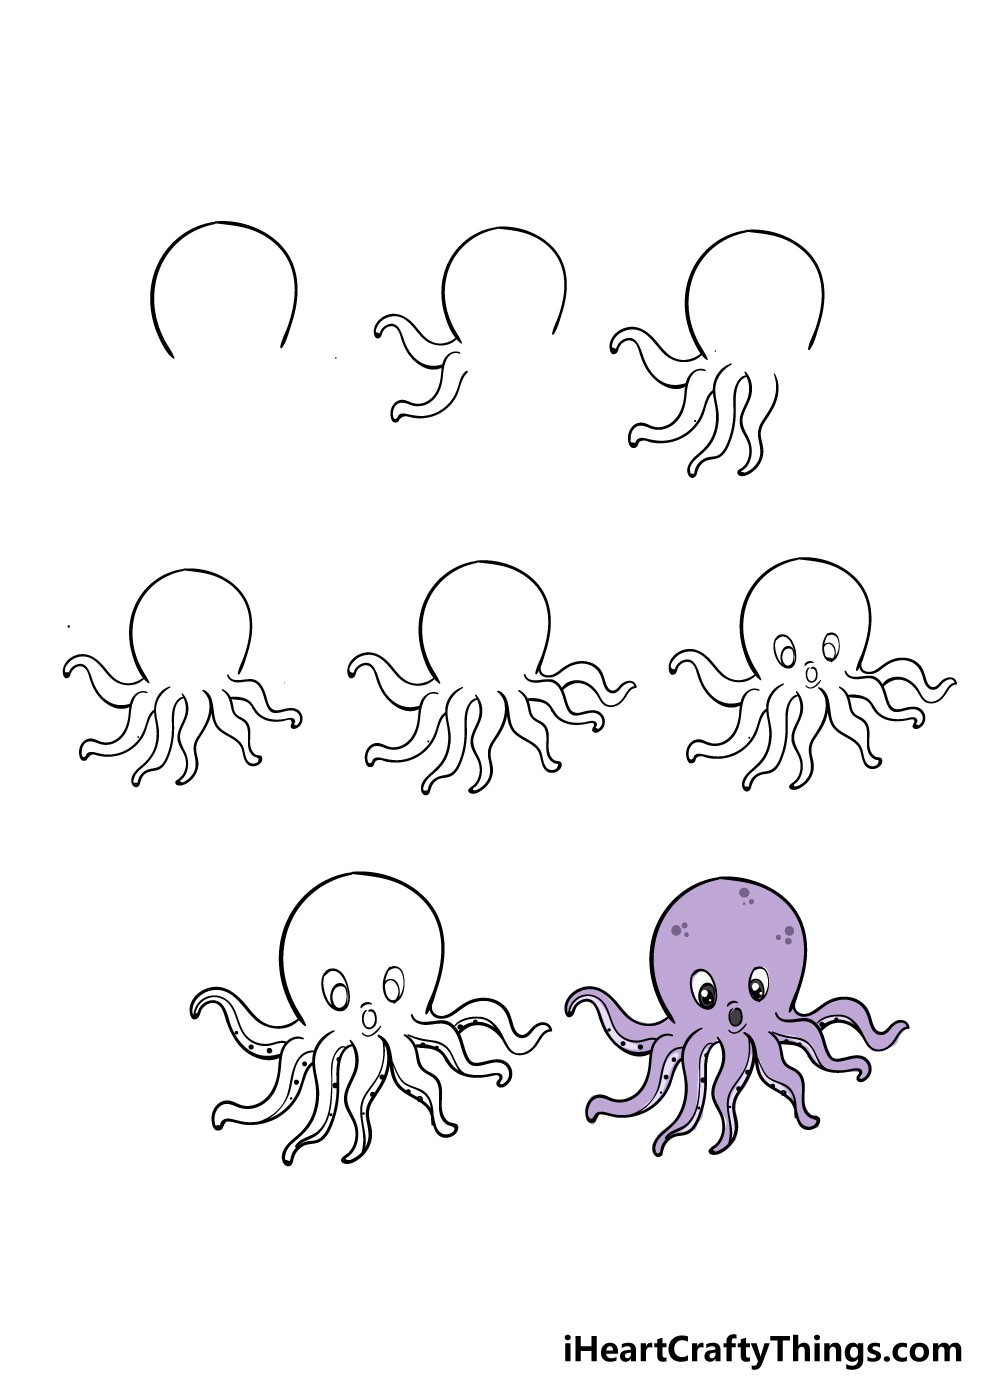 a simple octopus drawing